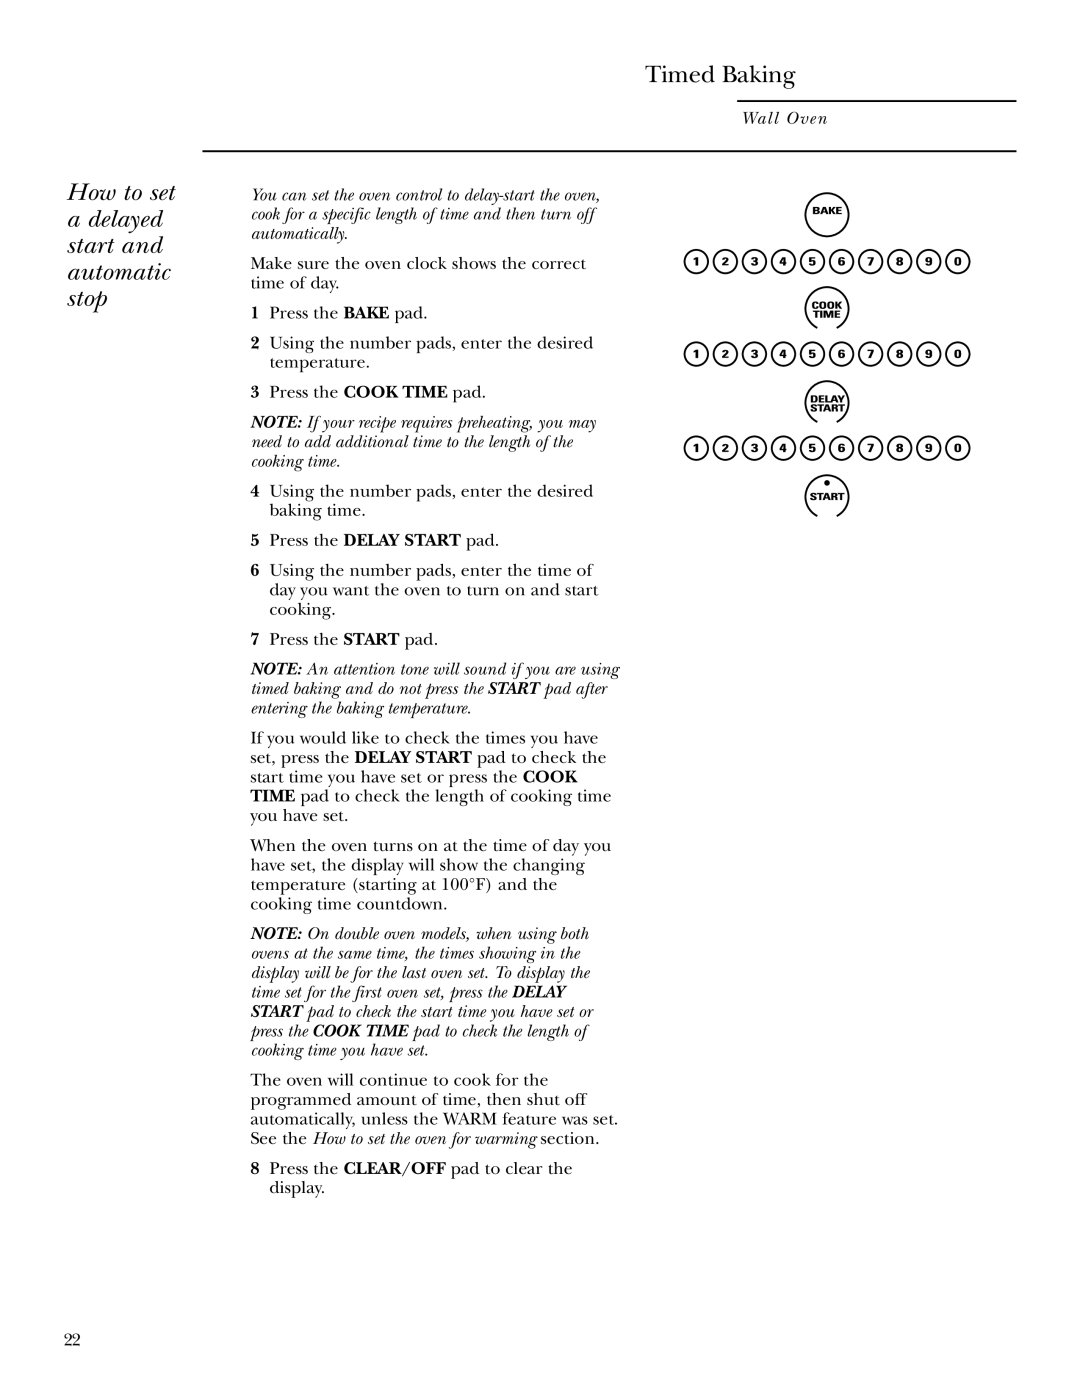 GE ZEK958, ZEK938 owner manual How to set a delayed start and automatic stop, Timed Baking, Wall Oven 